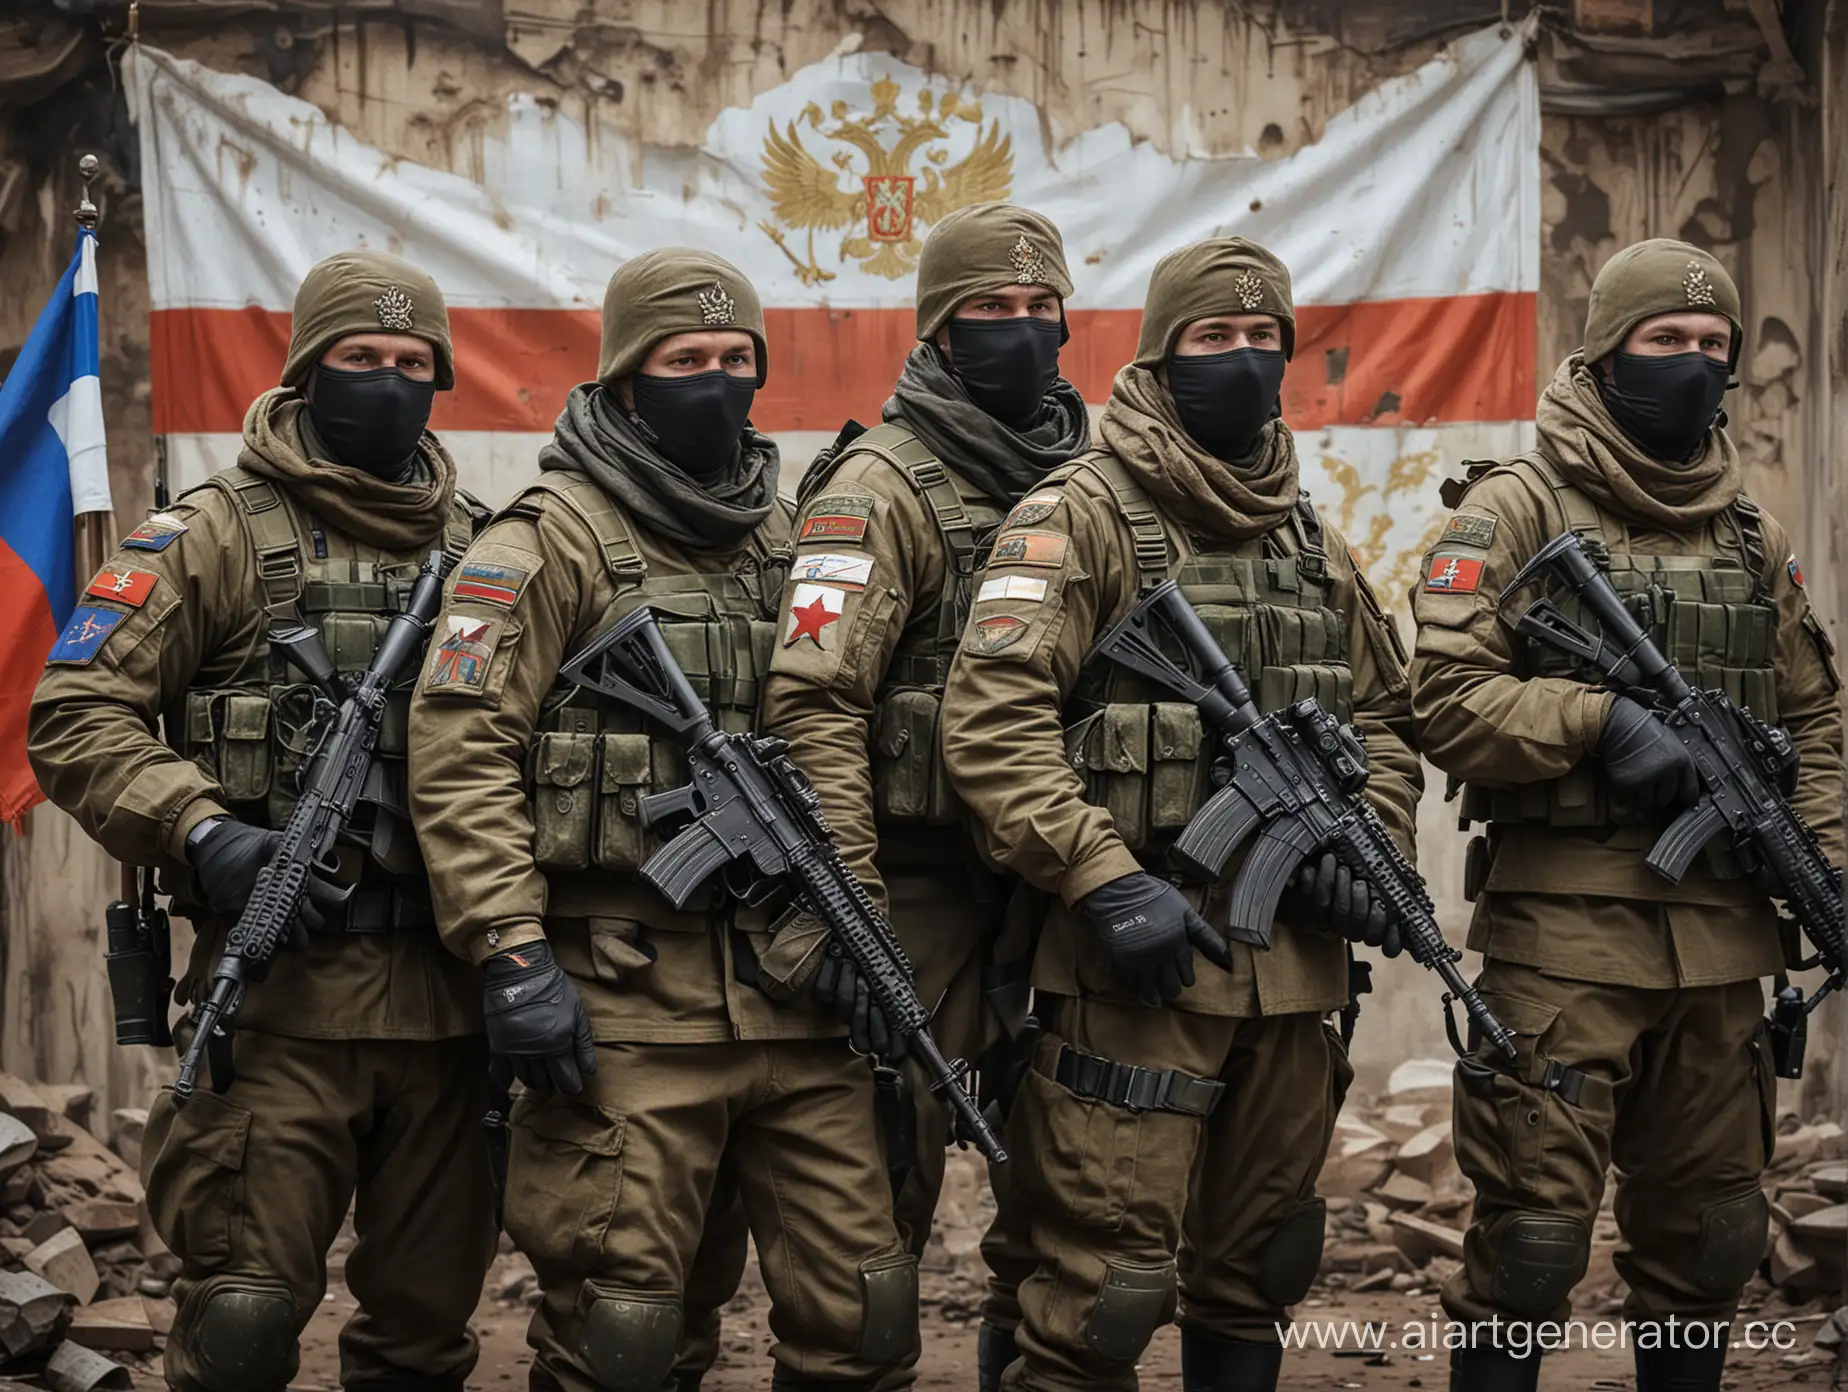 Russian-Soldiers-in-Protective-Military-Gear-with-Flags-and-Weapons